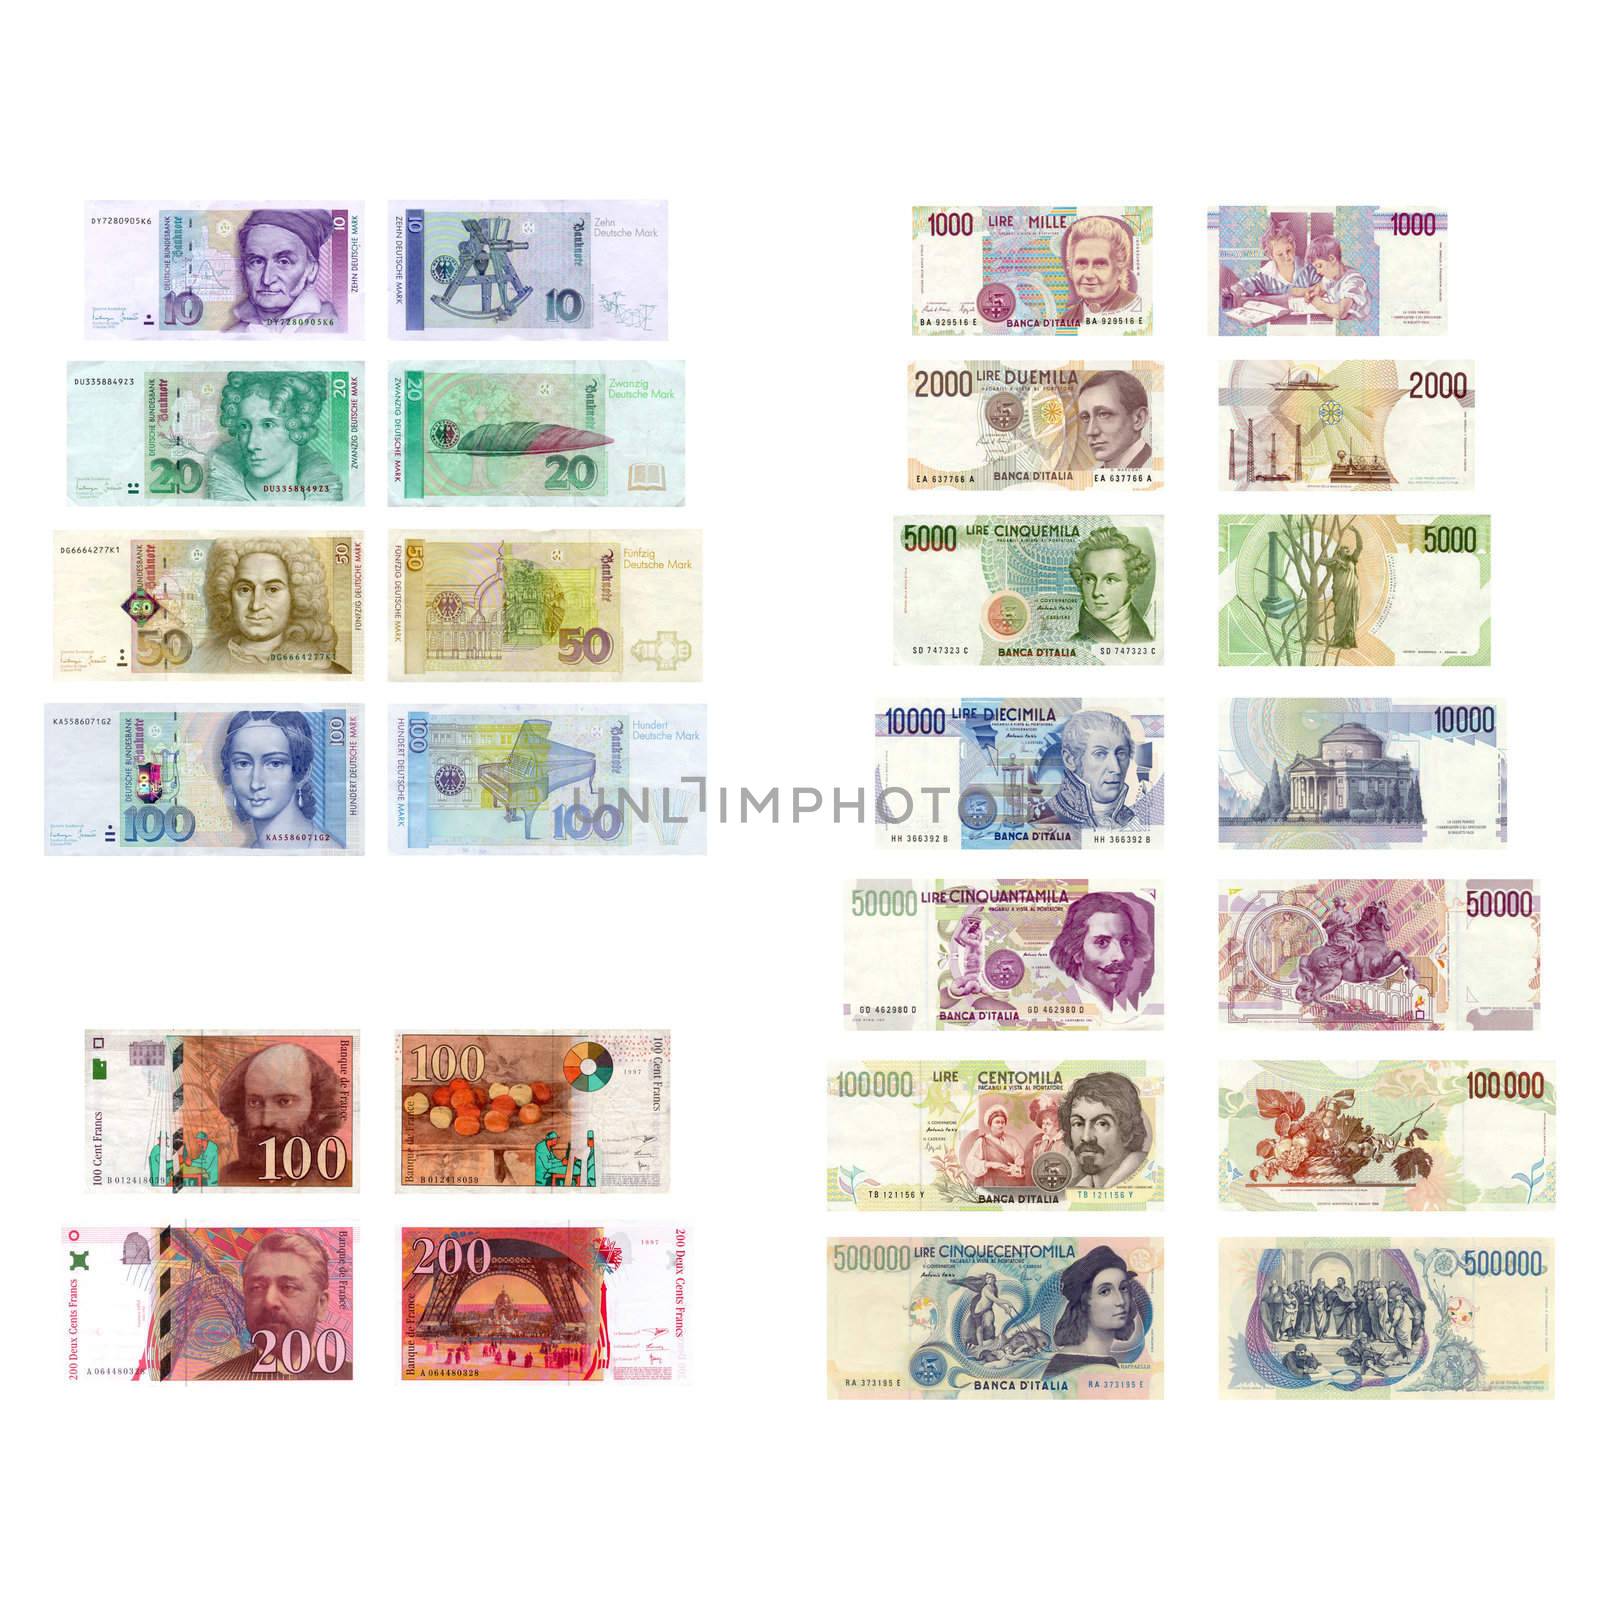 Old European currency: Deutsche Mark, Francs Francaise, Lire Italiane (All currencies NO MORE in use)